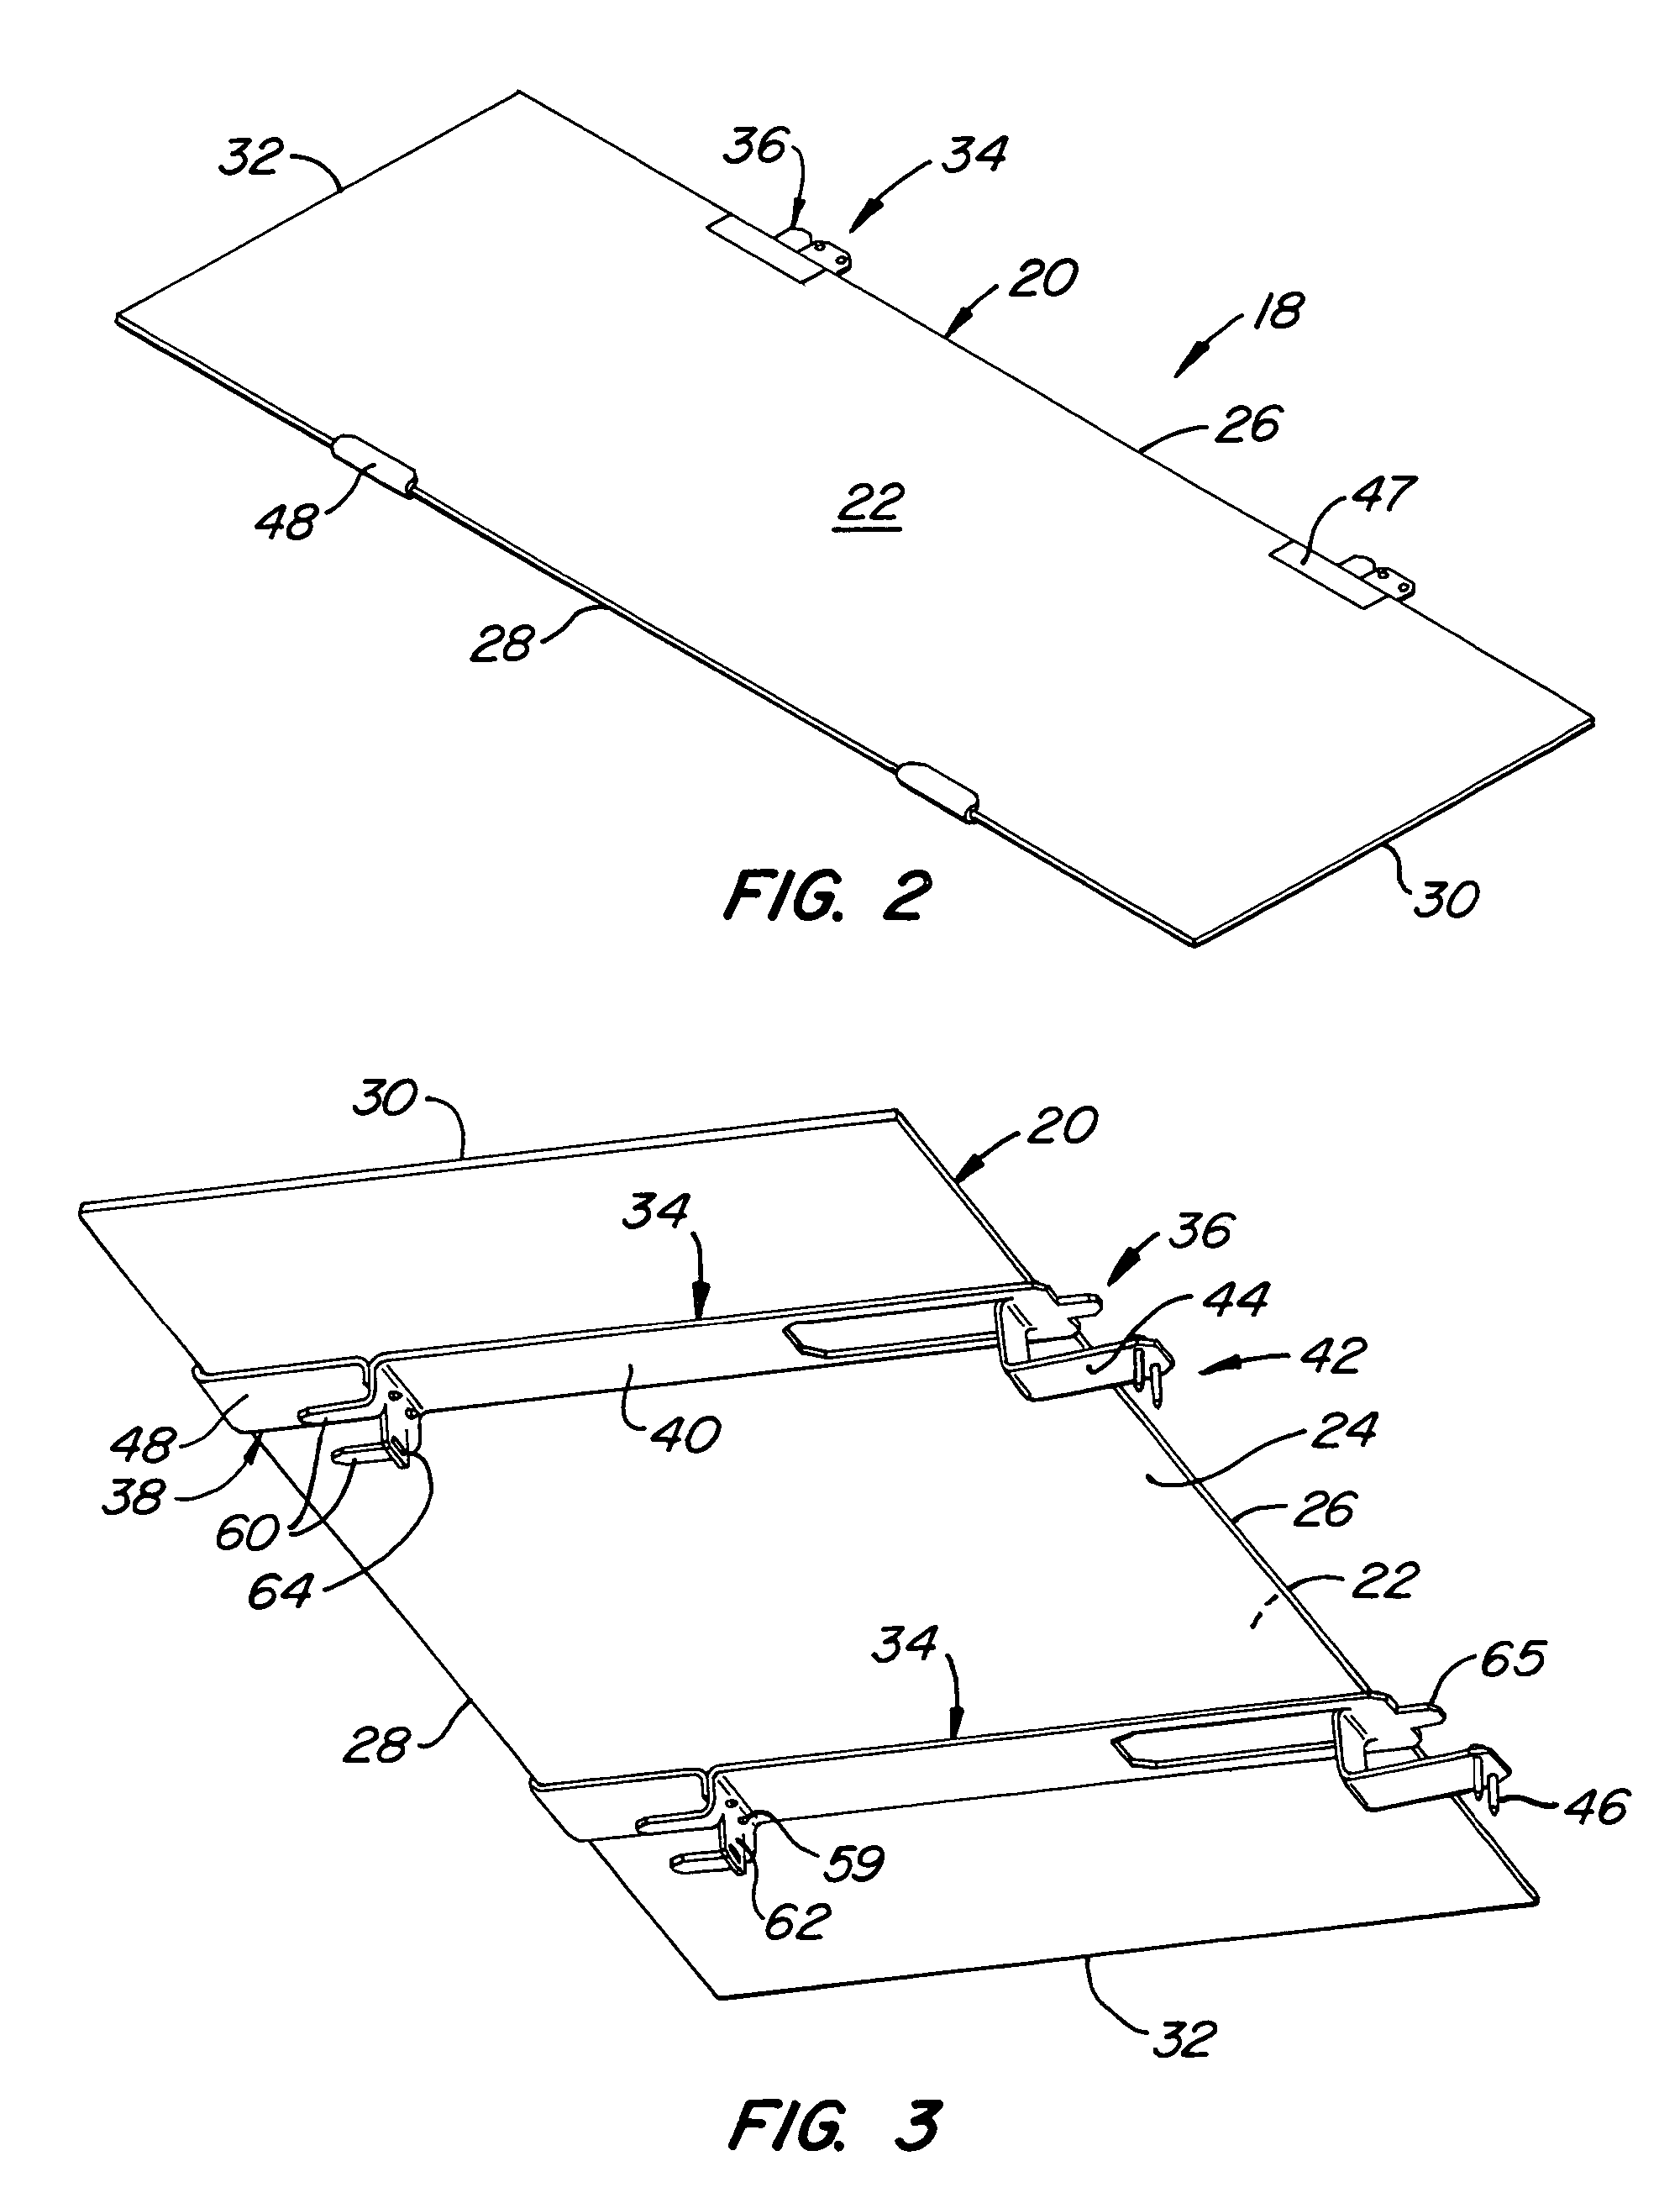 Shingle assembly with support bracket